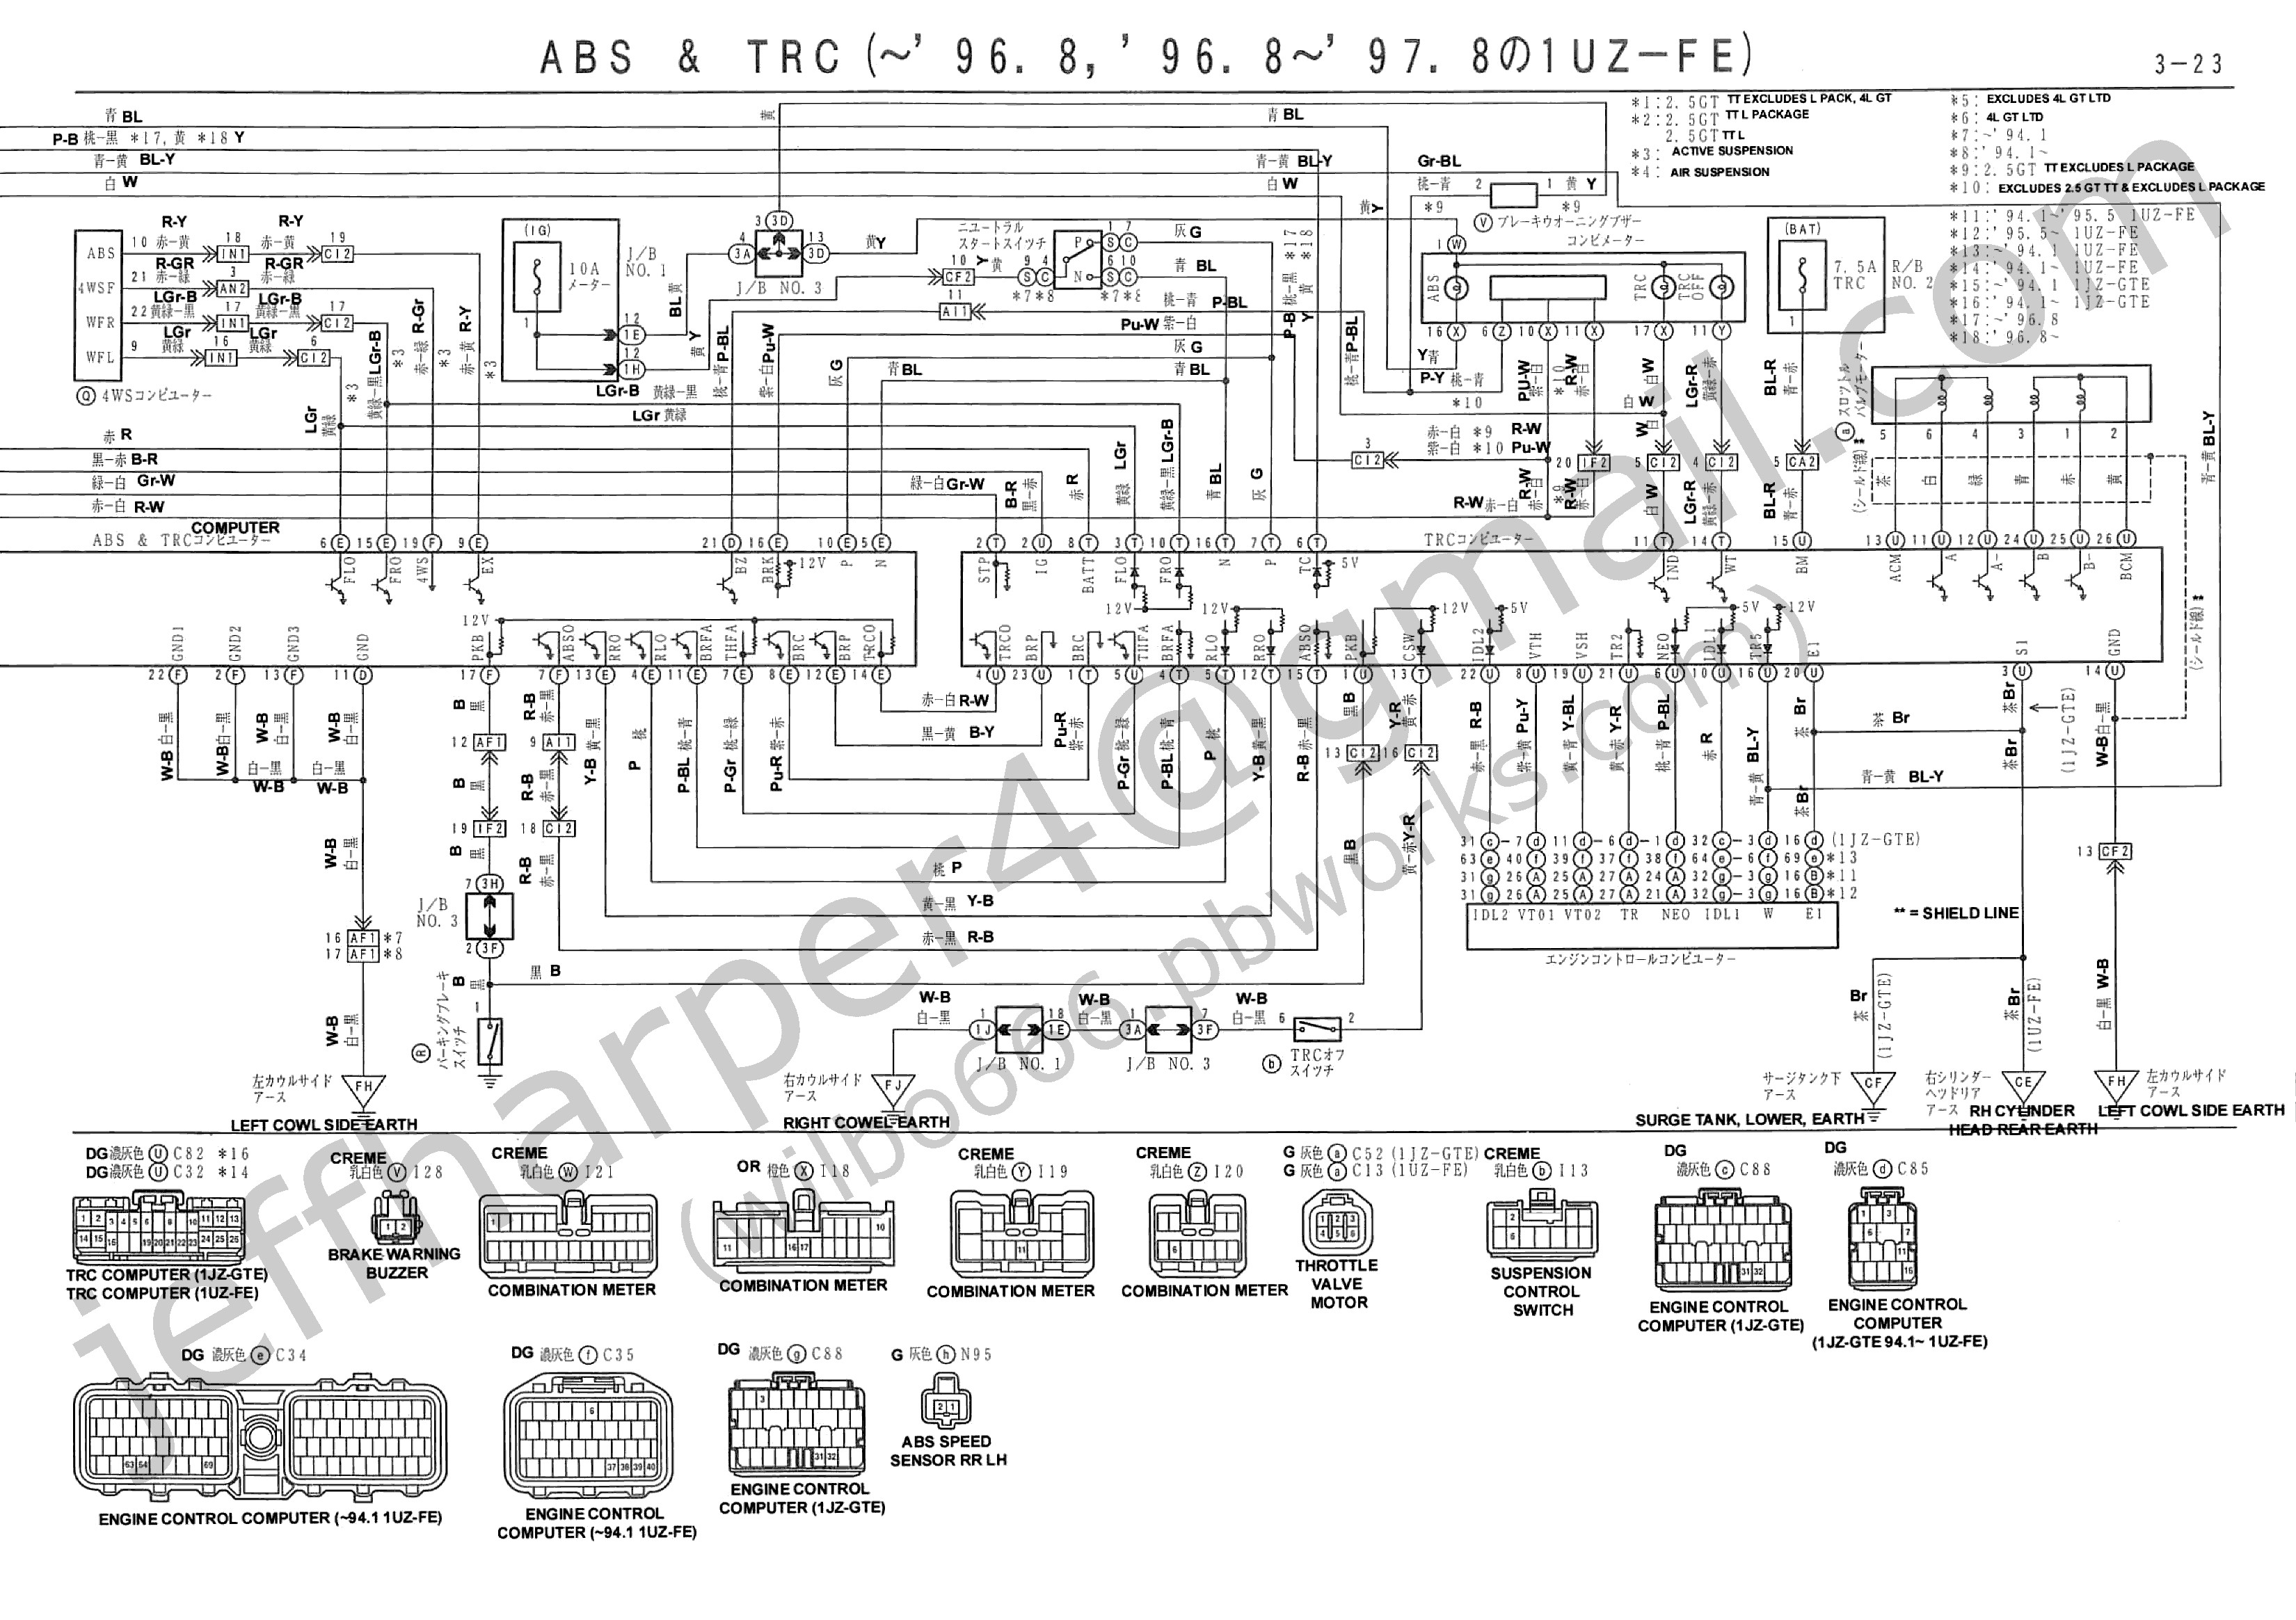 2000 Camry Engine Diagram 7mge toyota 3 0 Engine Diagram Free Download Wiring Diagram Wiring Of 2000 Camry Engine Diagram